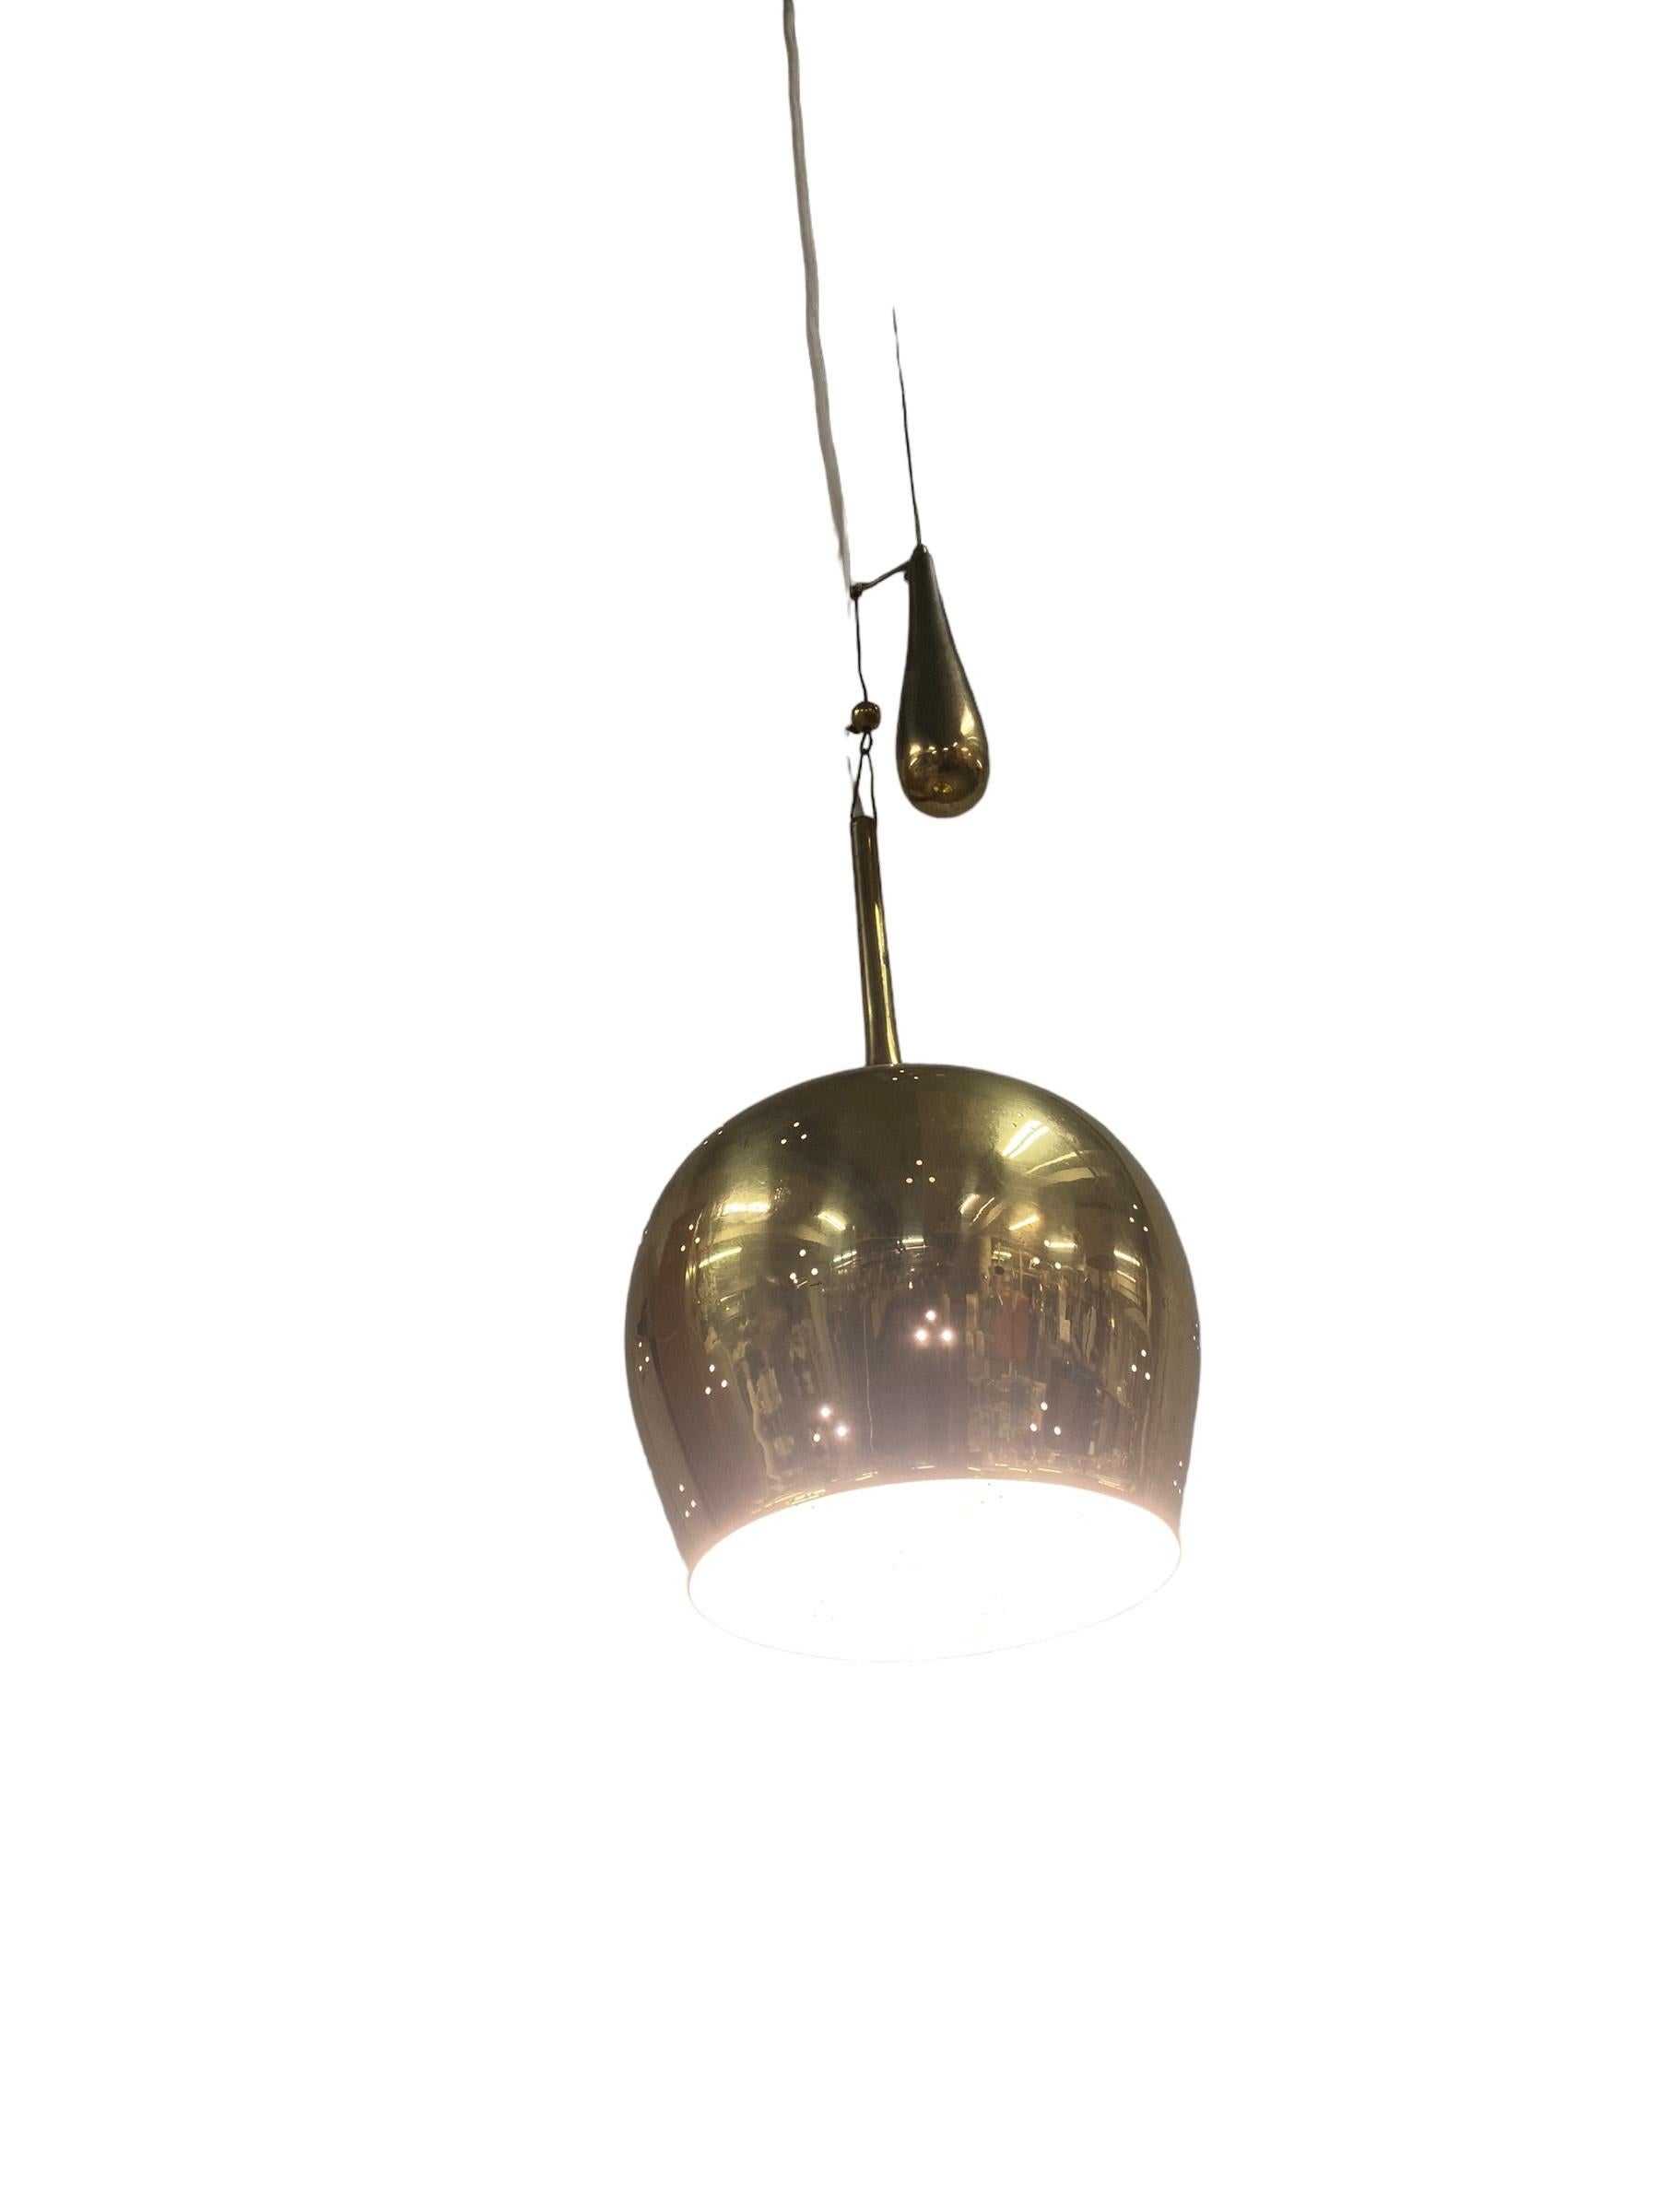 Finnish Paavo Tynell Ceiling Lamp M. A1957, Taito Oy 1950s For Sale